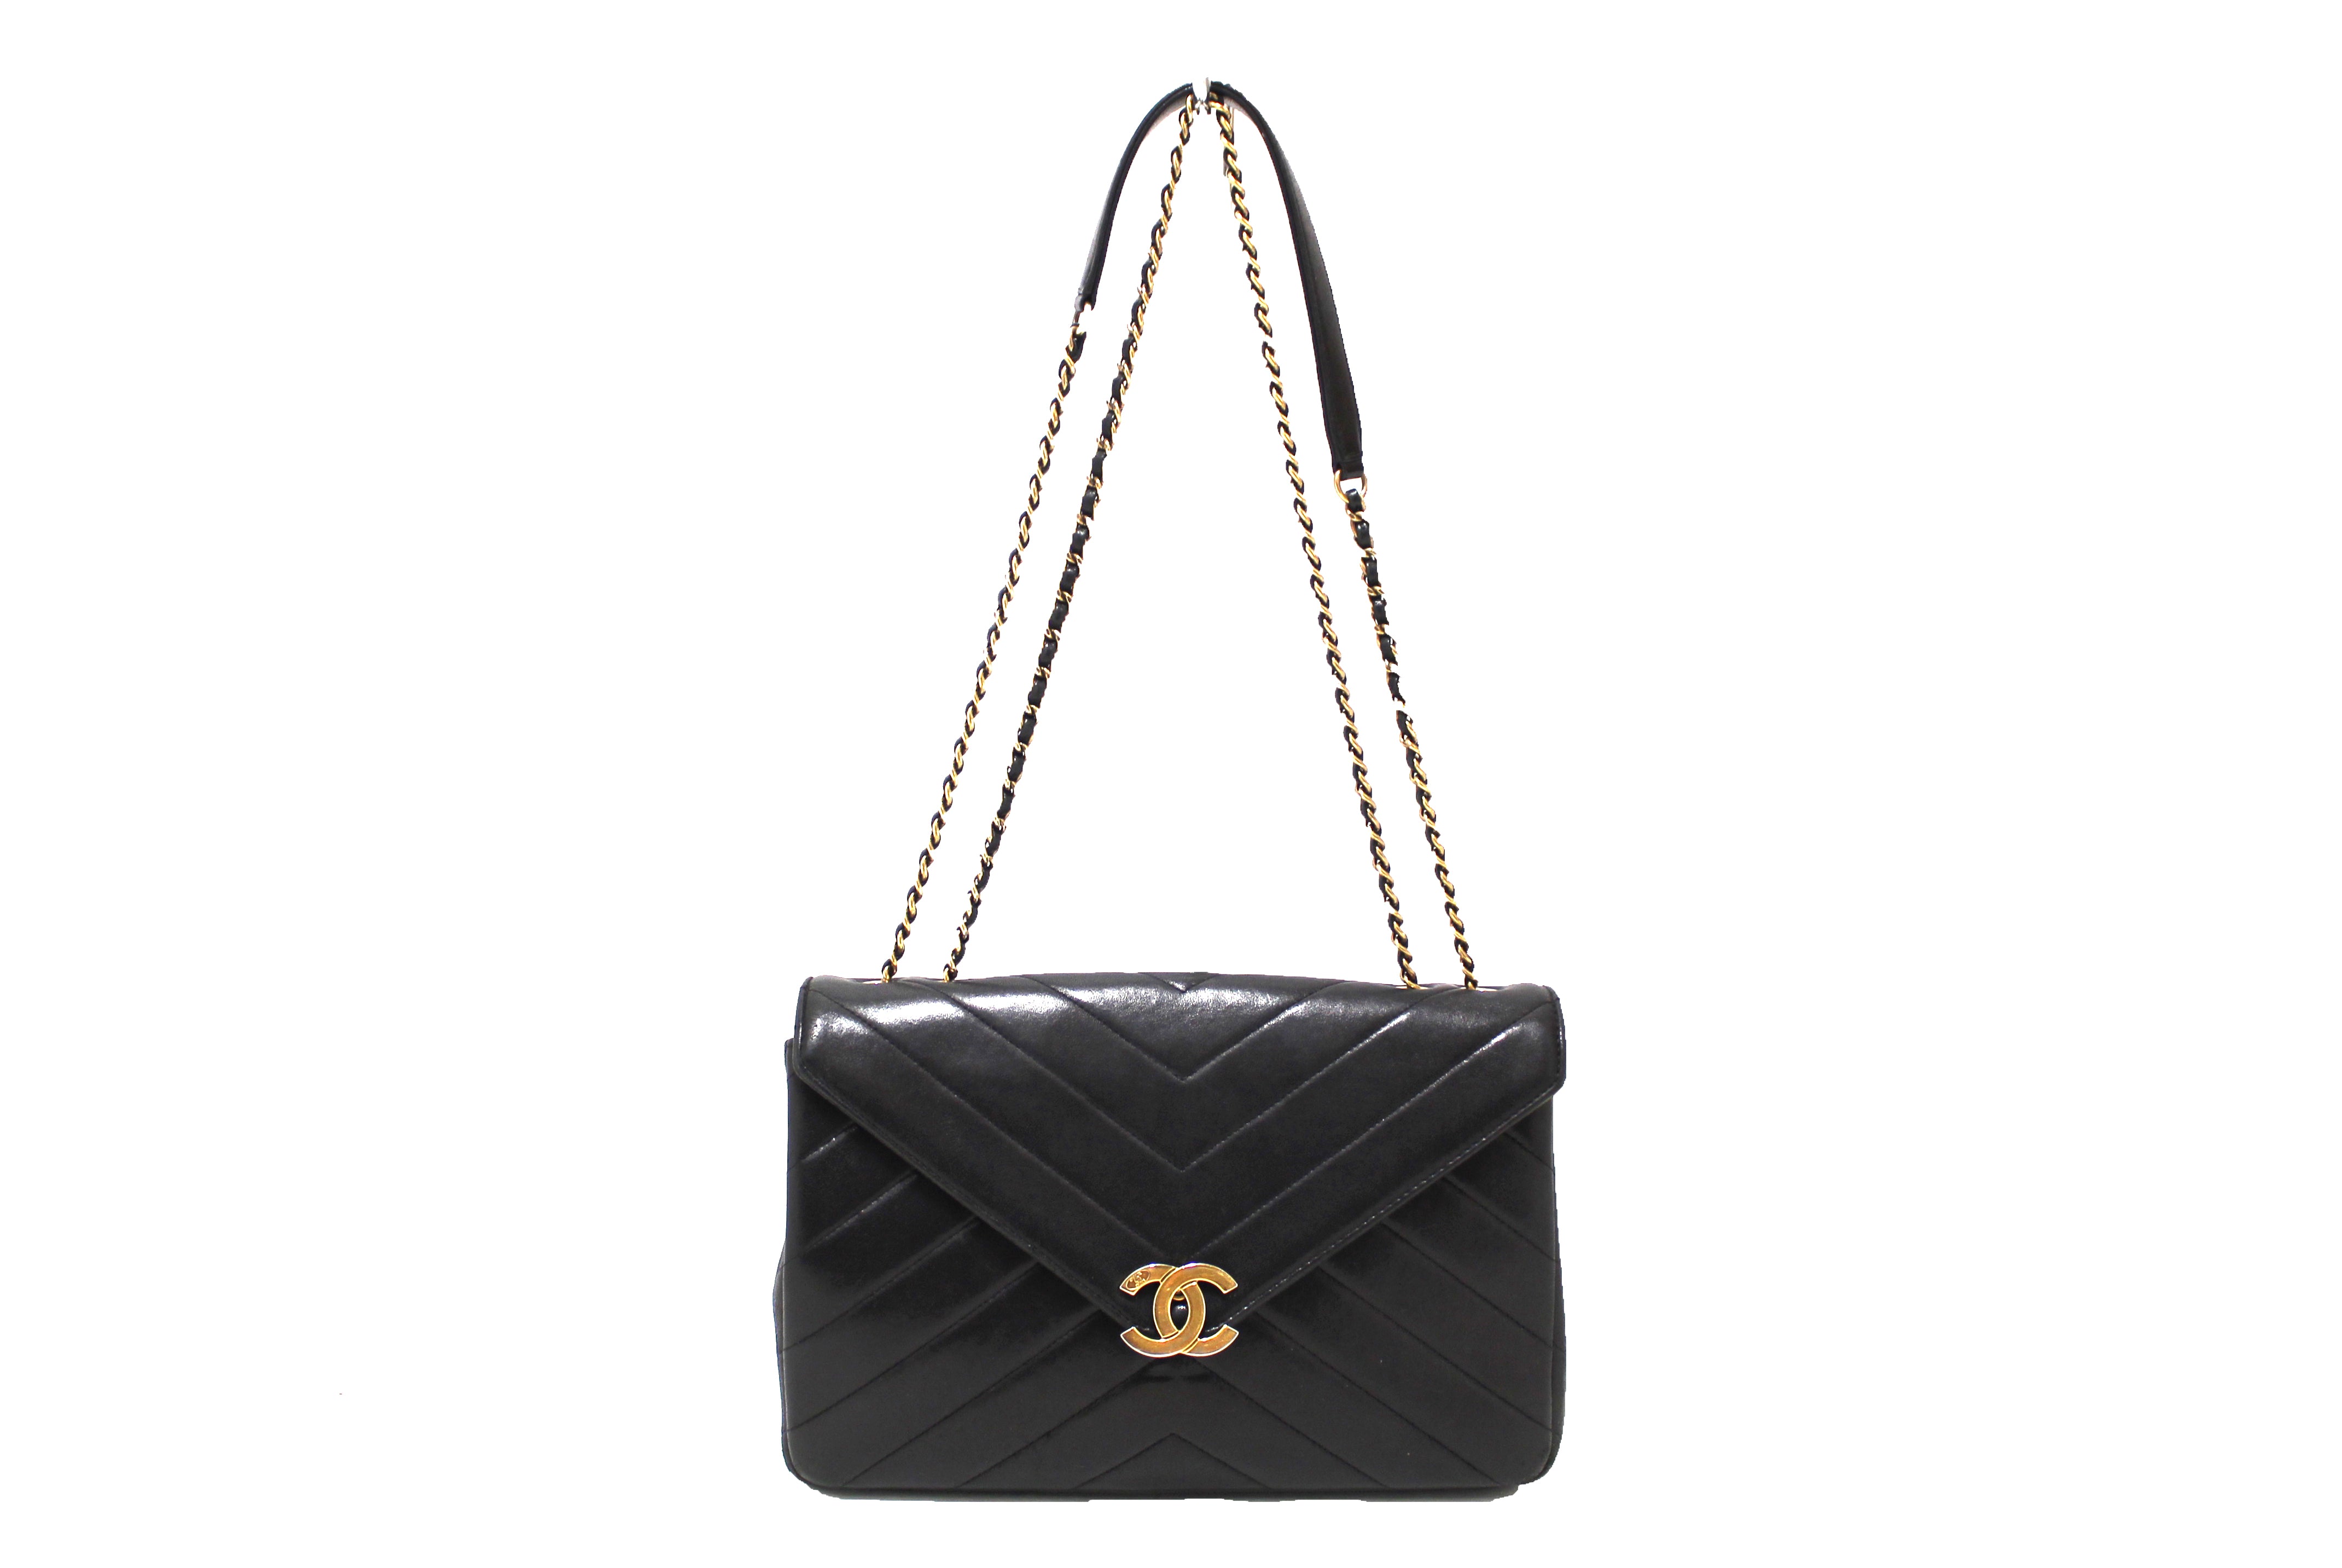 Authentic Chanel Black Quilted Lambskin Leather Reversed Chevron Flap Bag